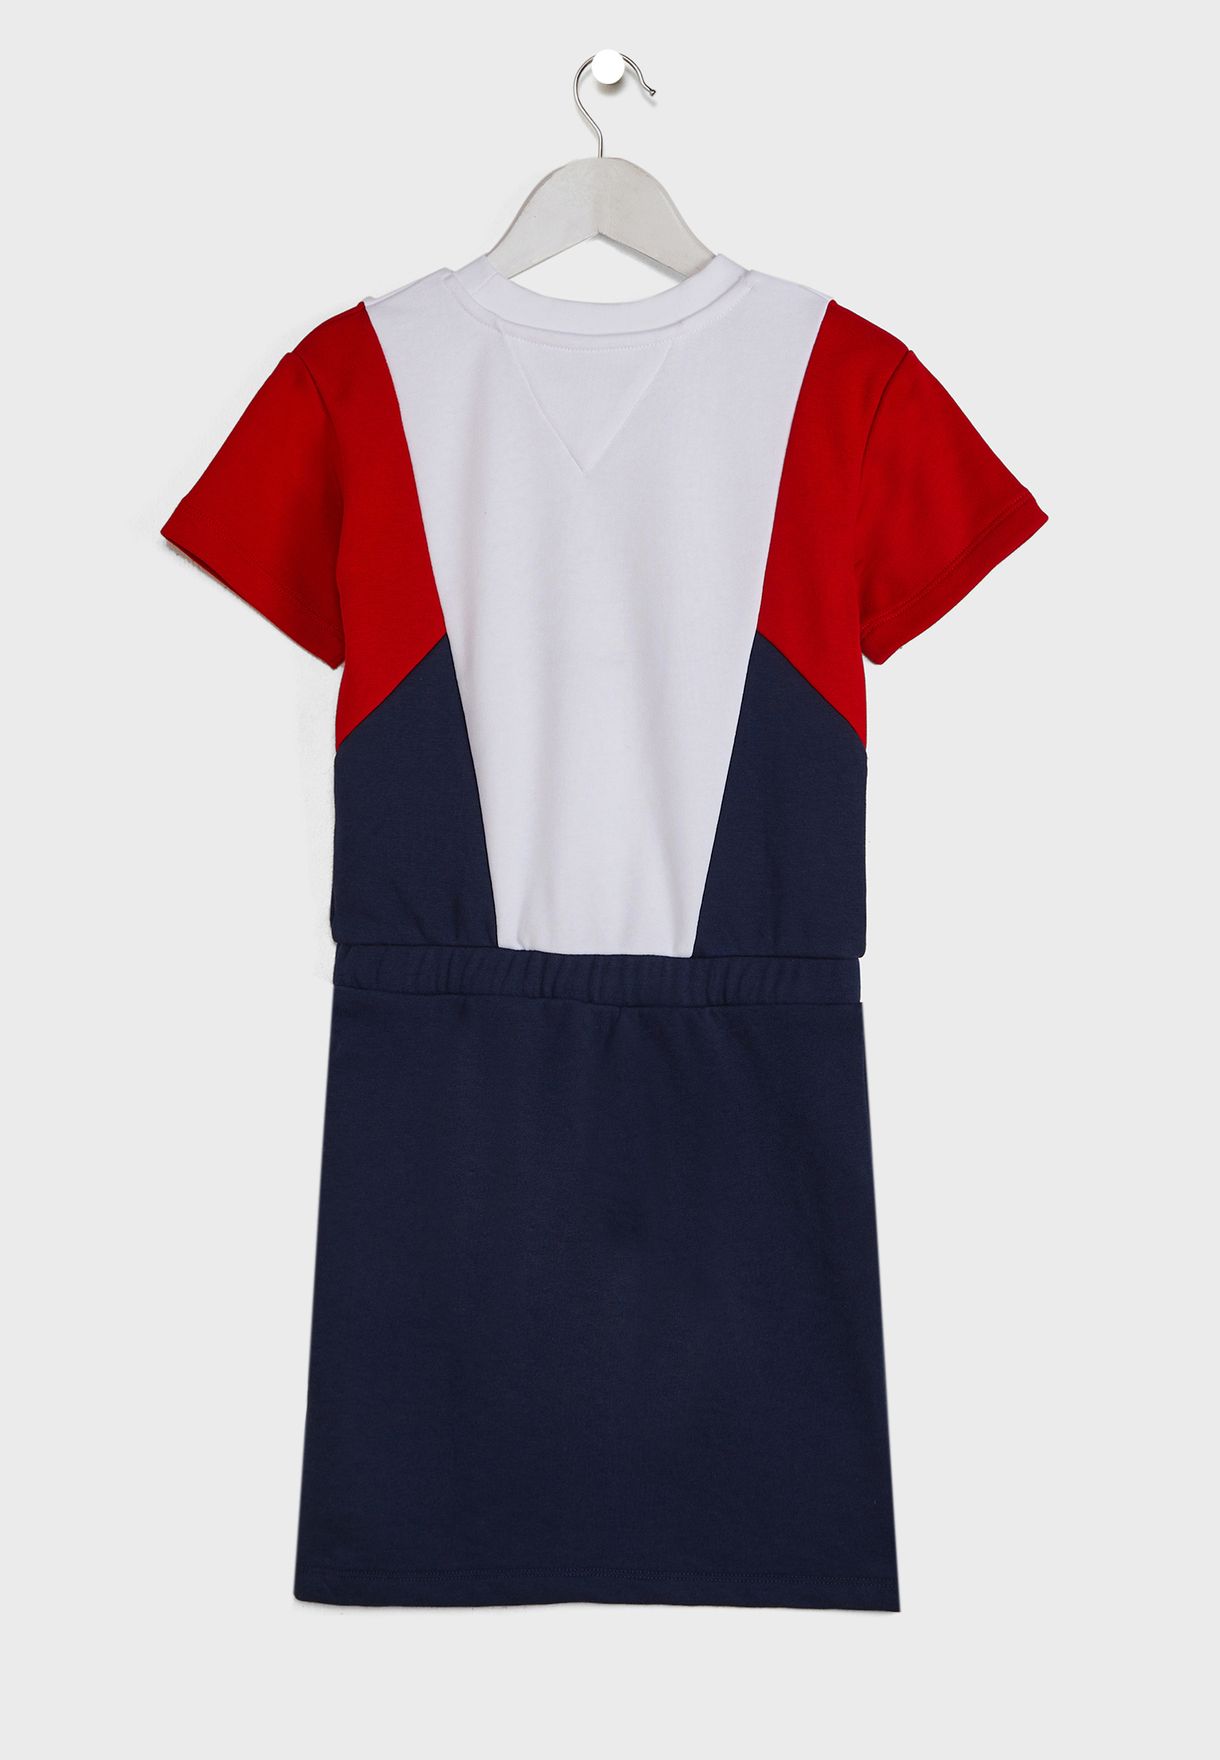 Youth Colour Block Dress